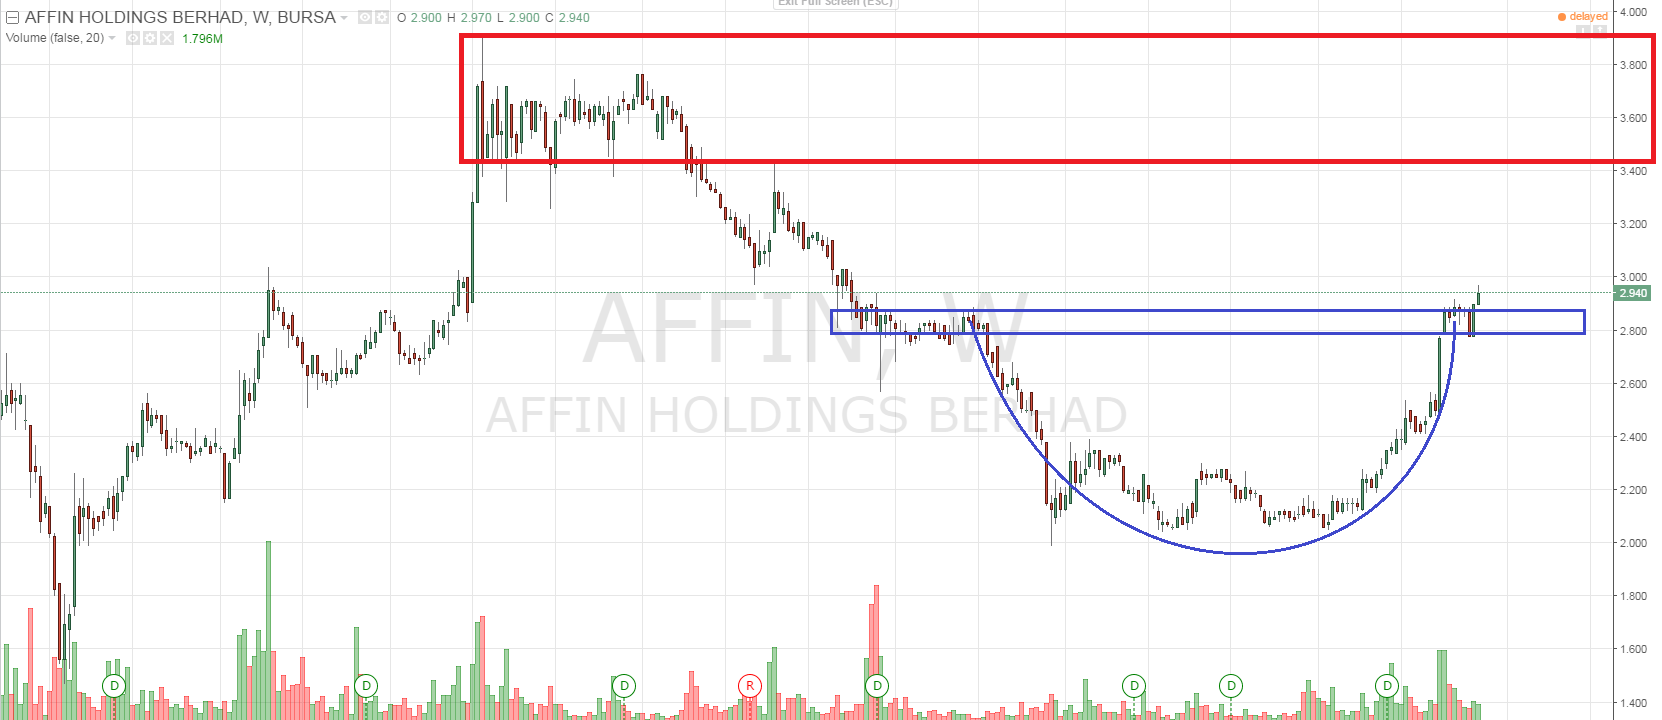 AFFIN Weekly Rounding Bottom